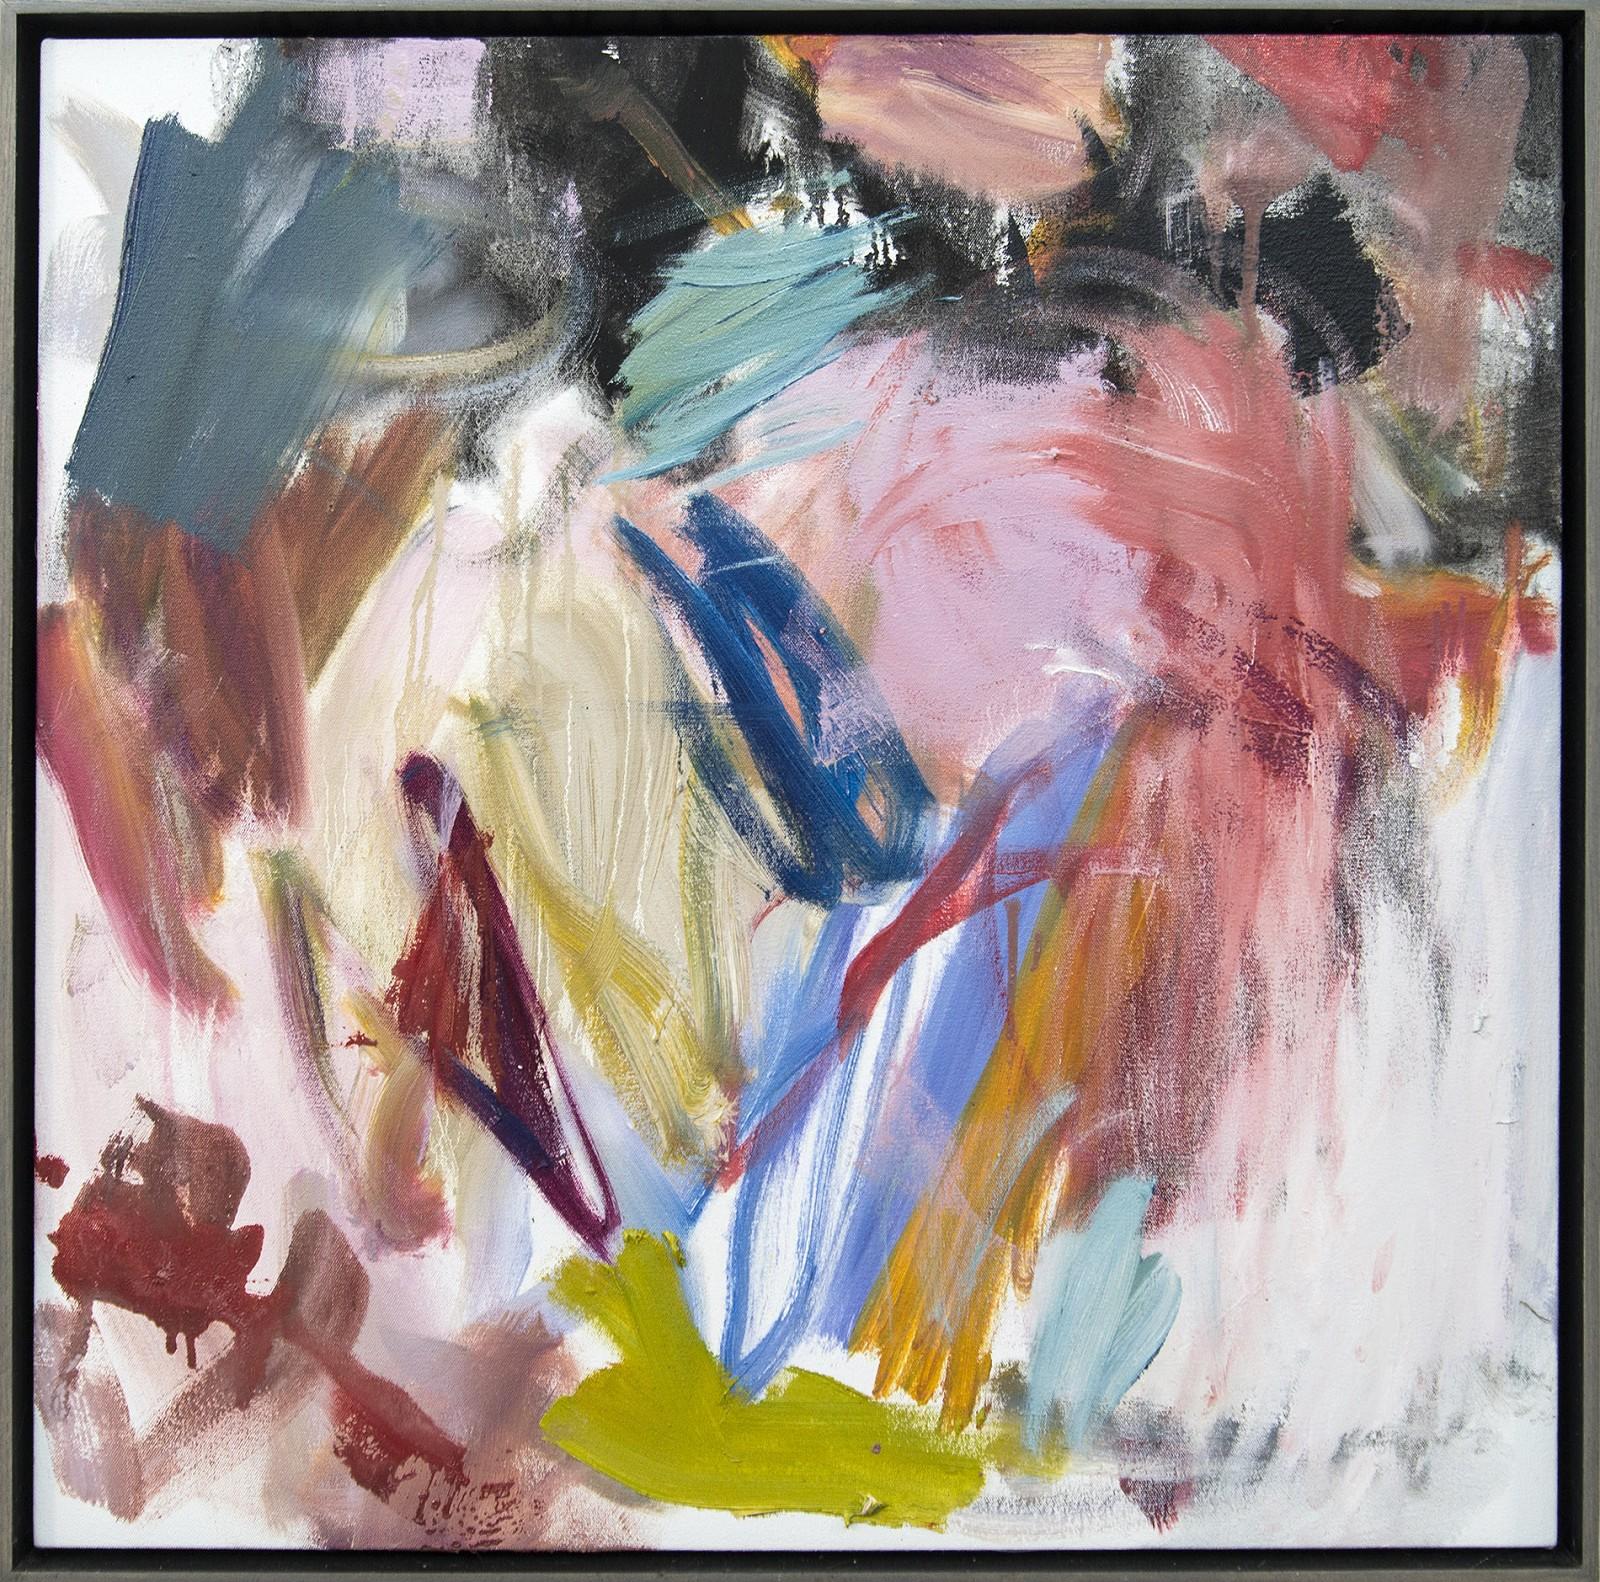 None of These Things - vibrant, colourful, gestural abstraction, oil on canvas - Painting by Scott Pattinson